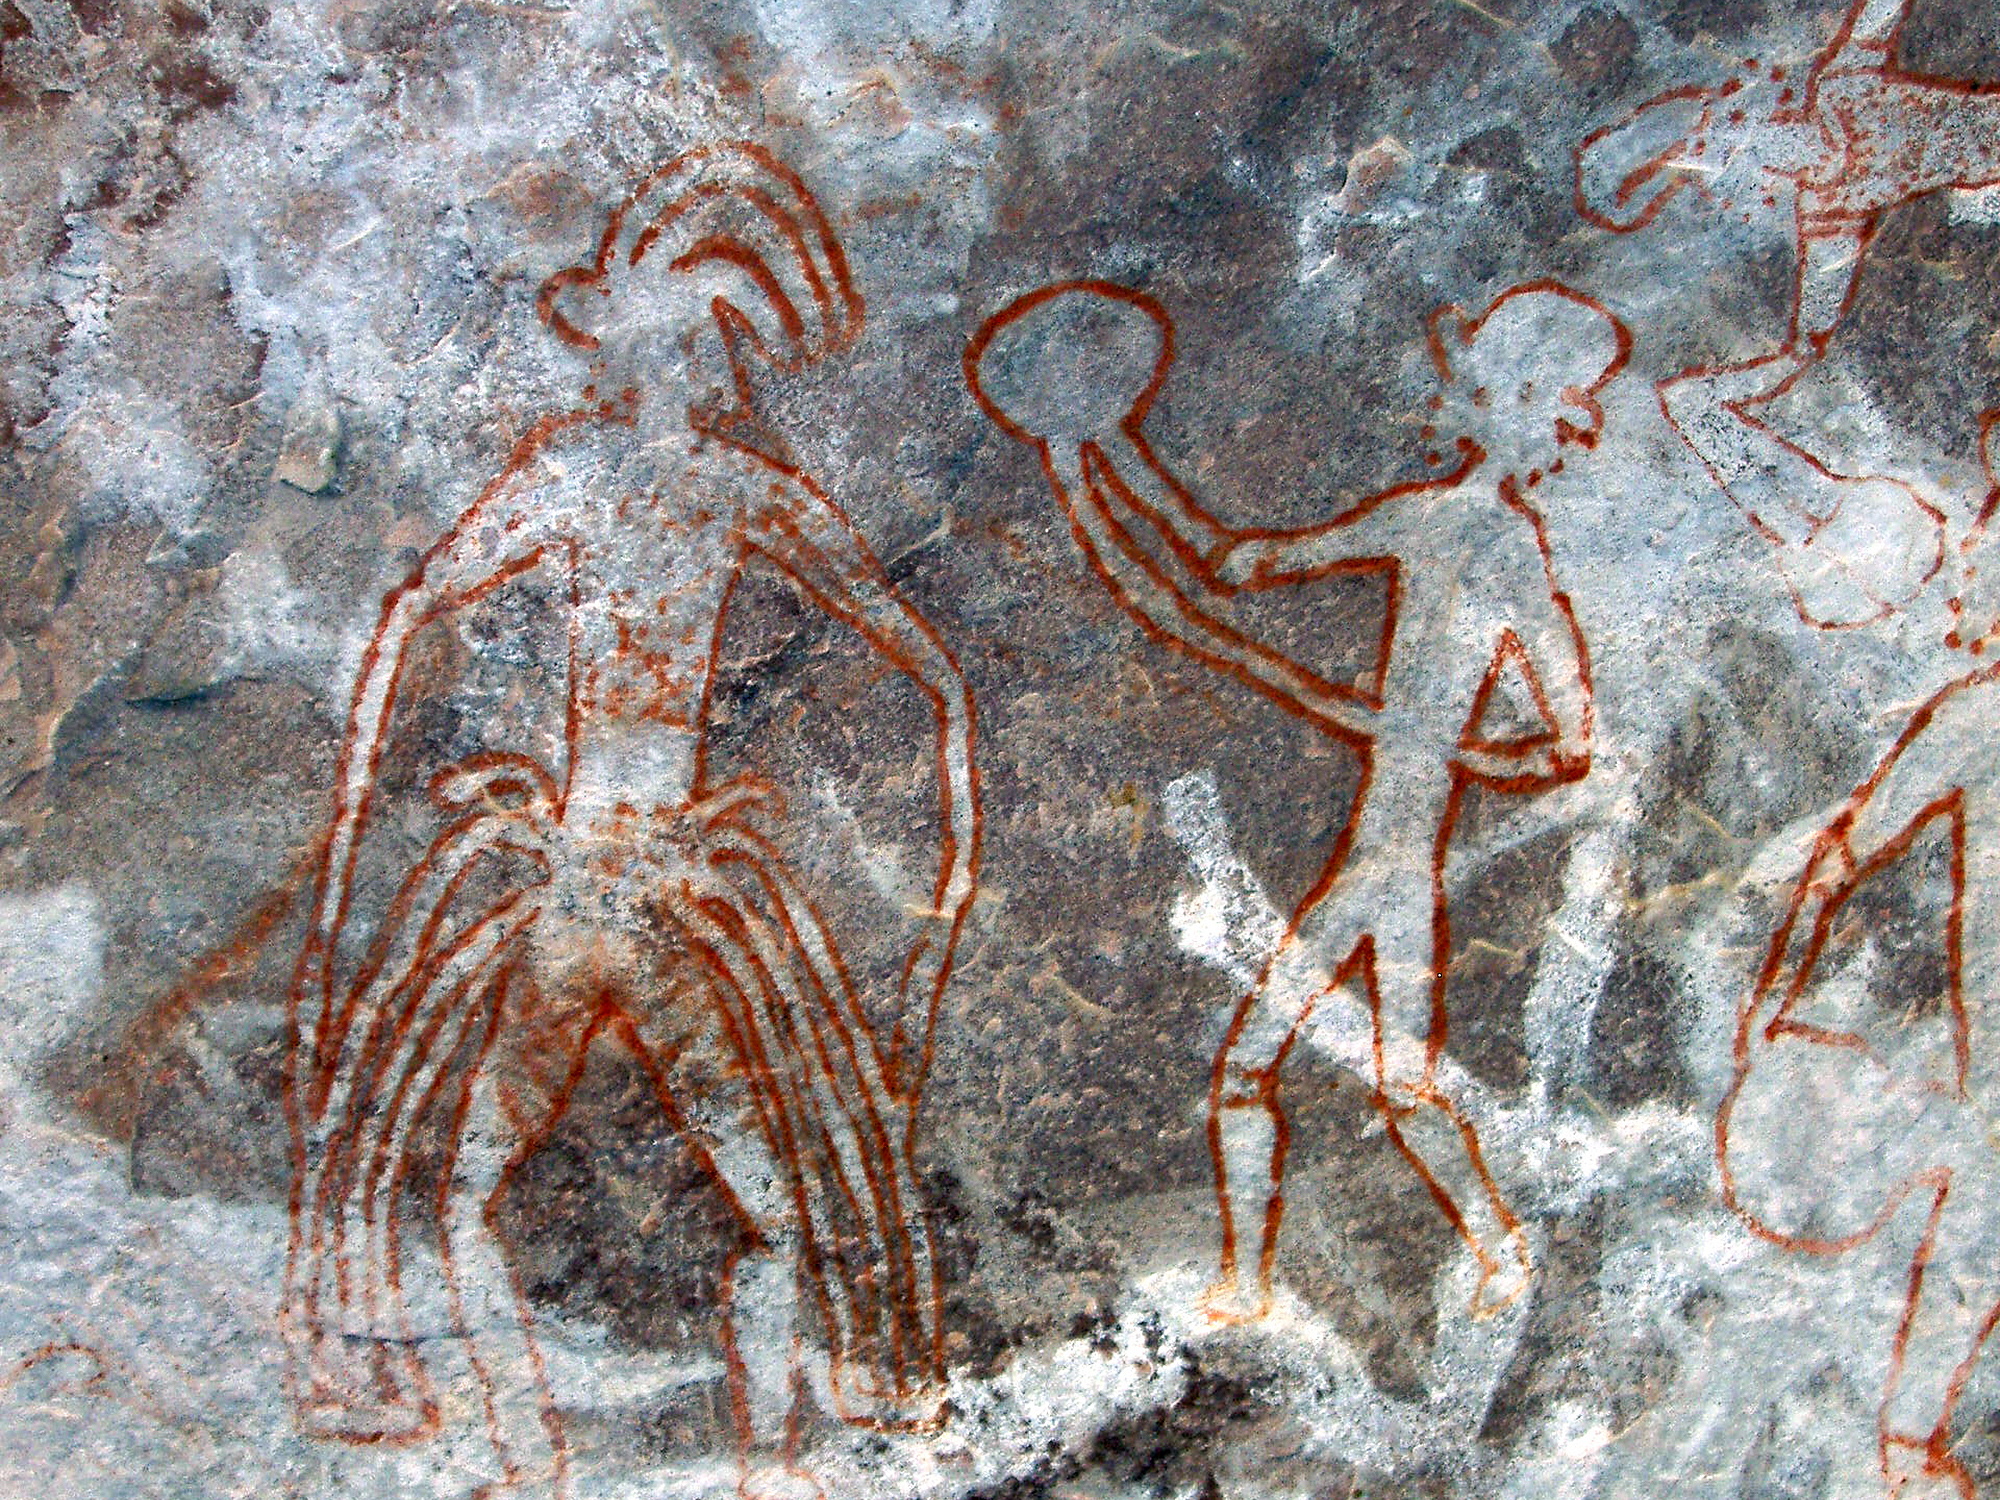 The Characteristics of Indian Rock Paintings, Pictographs, Petroglyphs